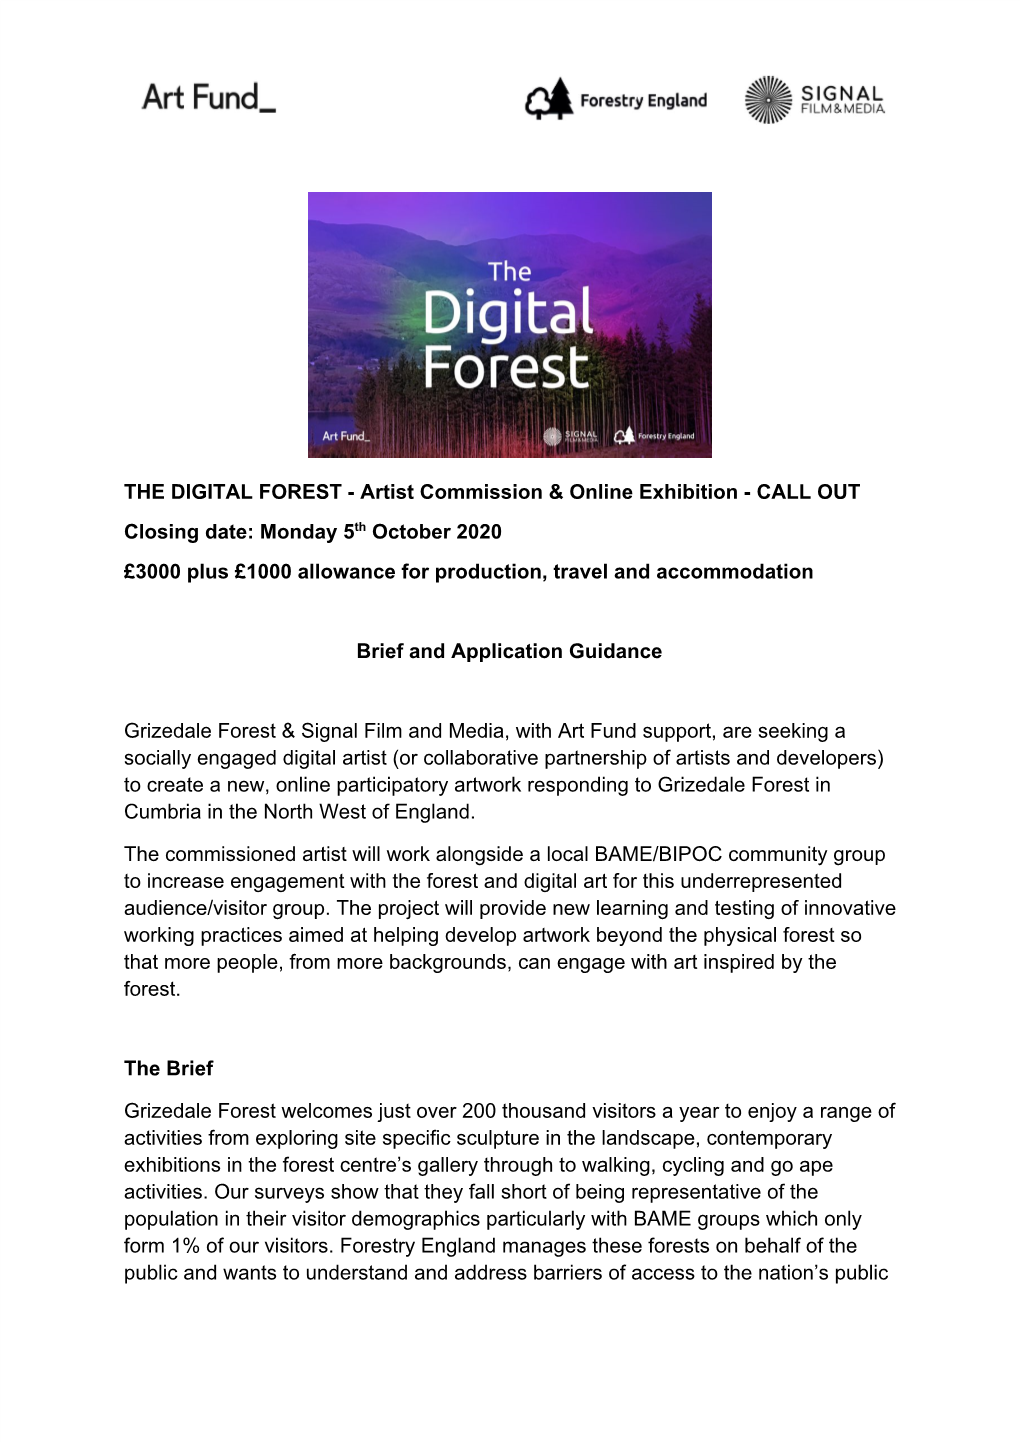 THE DIGITAL FOREST - Artist Commission & Online Exhibition - CALL OUT